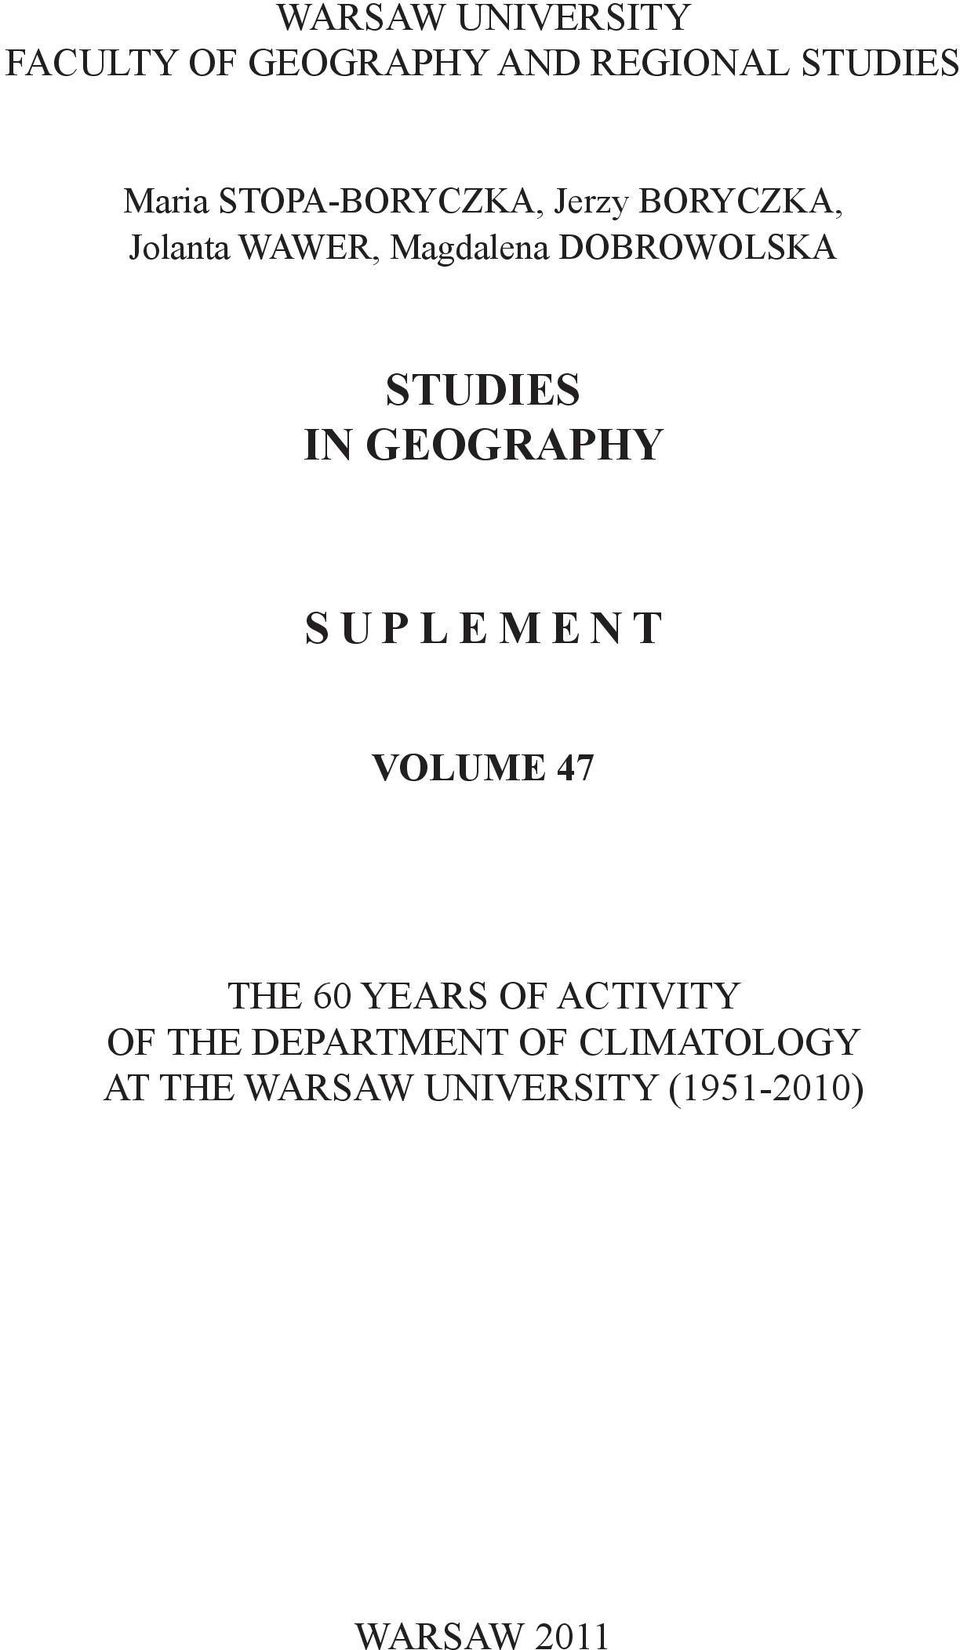 STUDIES IN GEOGRAPHY S U P L E M E N T VOLUME 47 THE 60 YEARS OF